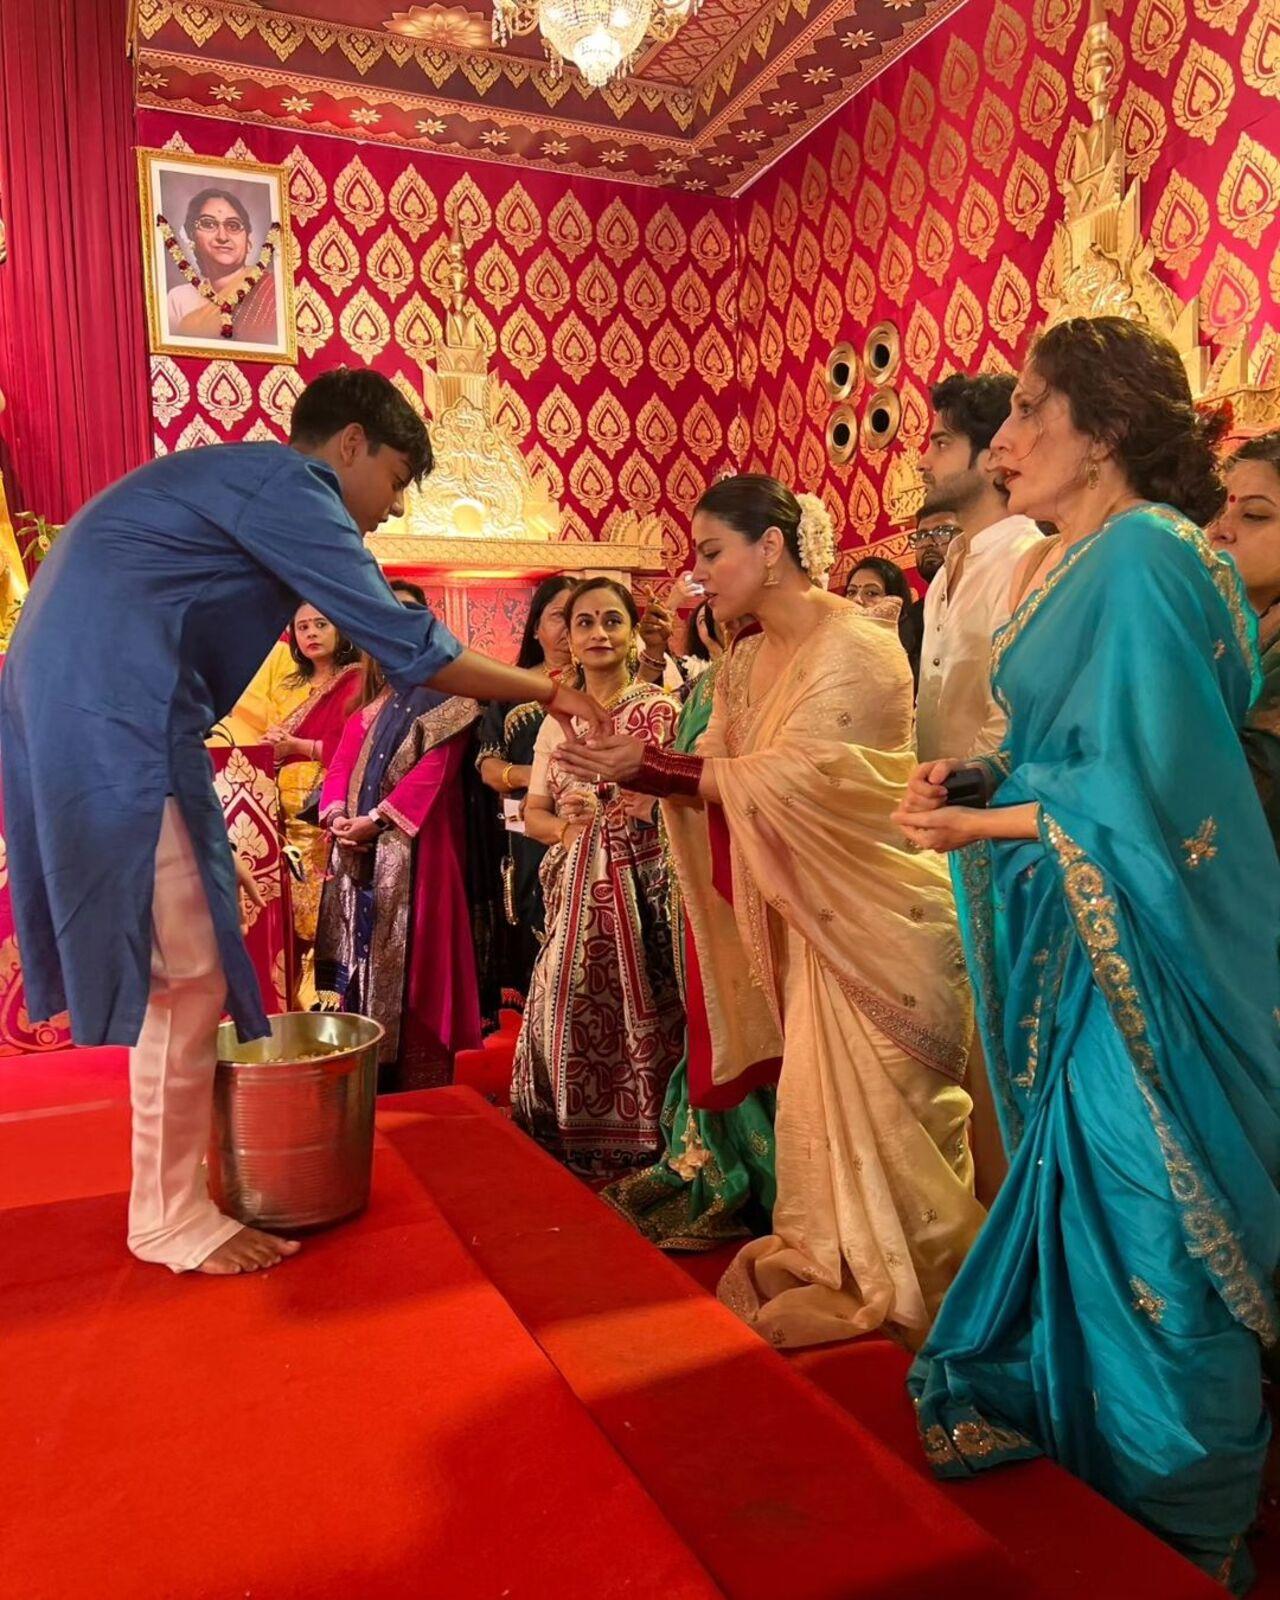 Through the festivity, Kajol's son Yug was seen accompanying her and soaking in their tradition and culture